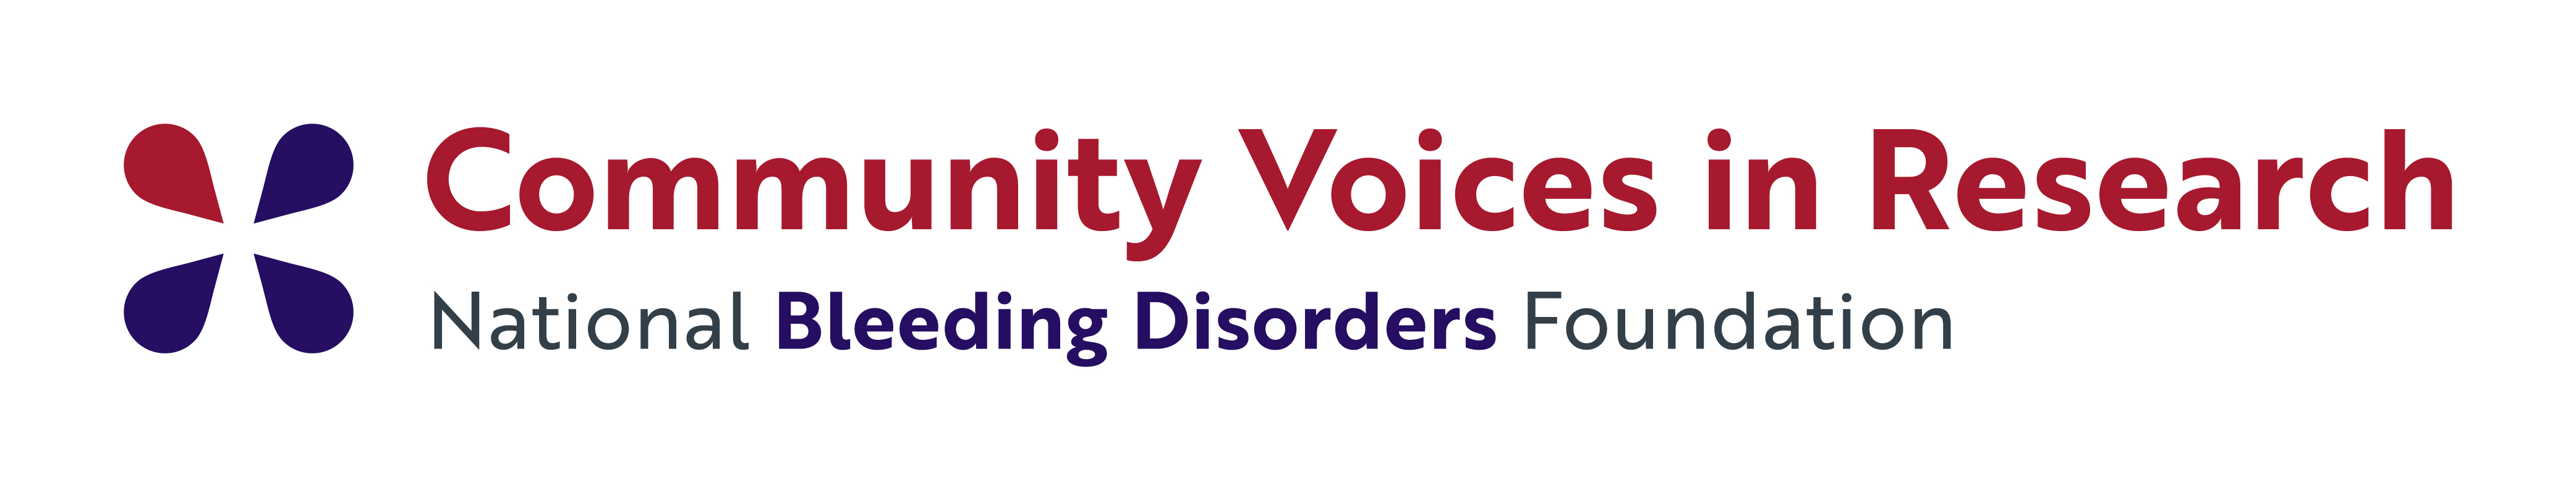 NHF Community Voices in Research